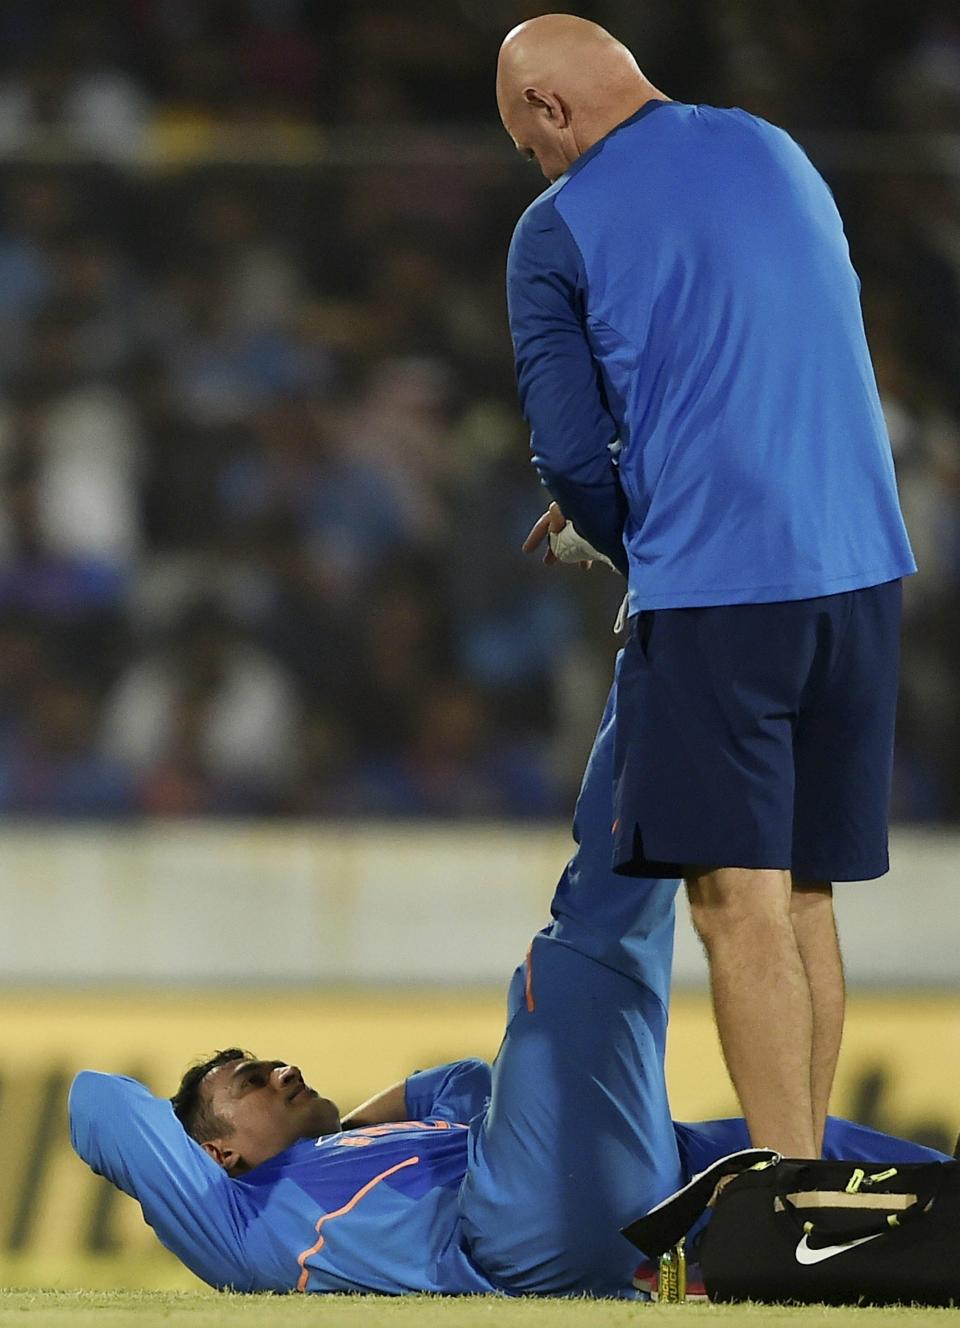 Hyderabad: Indian cricketer MS Dhoni gets medical assistance during the first One Day International (ODI) series cricket match against Australia, in Hyderabad, Saturday, March 2, 2019. (PTI Photo/R Senthil Kumar)(PTI3_2_2019_000216A)